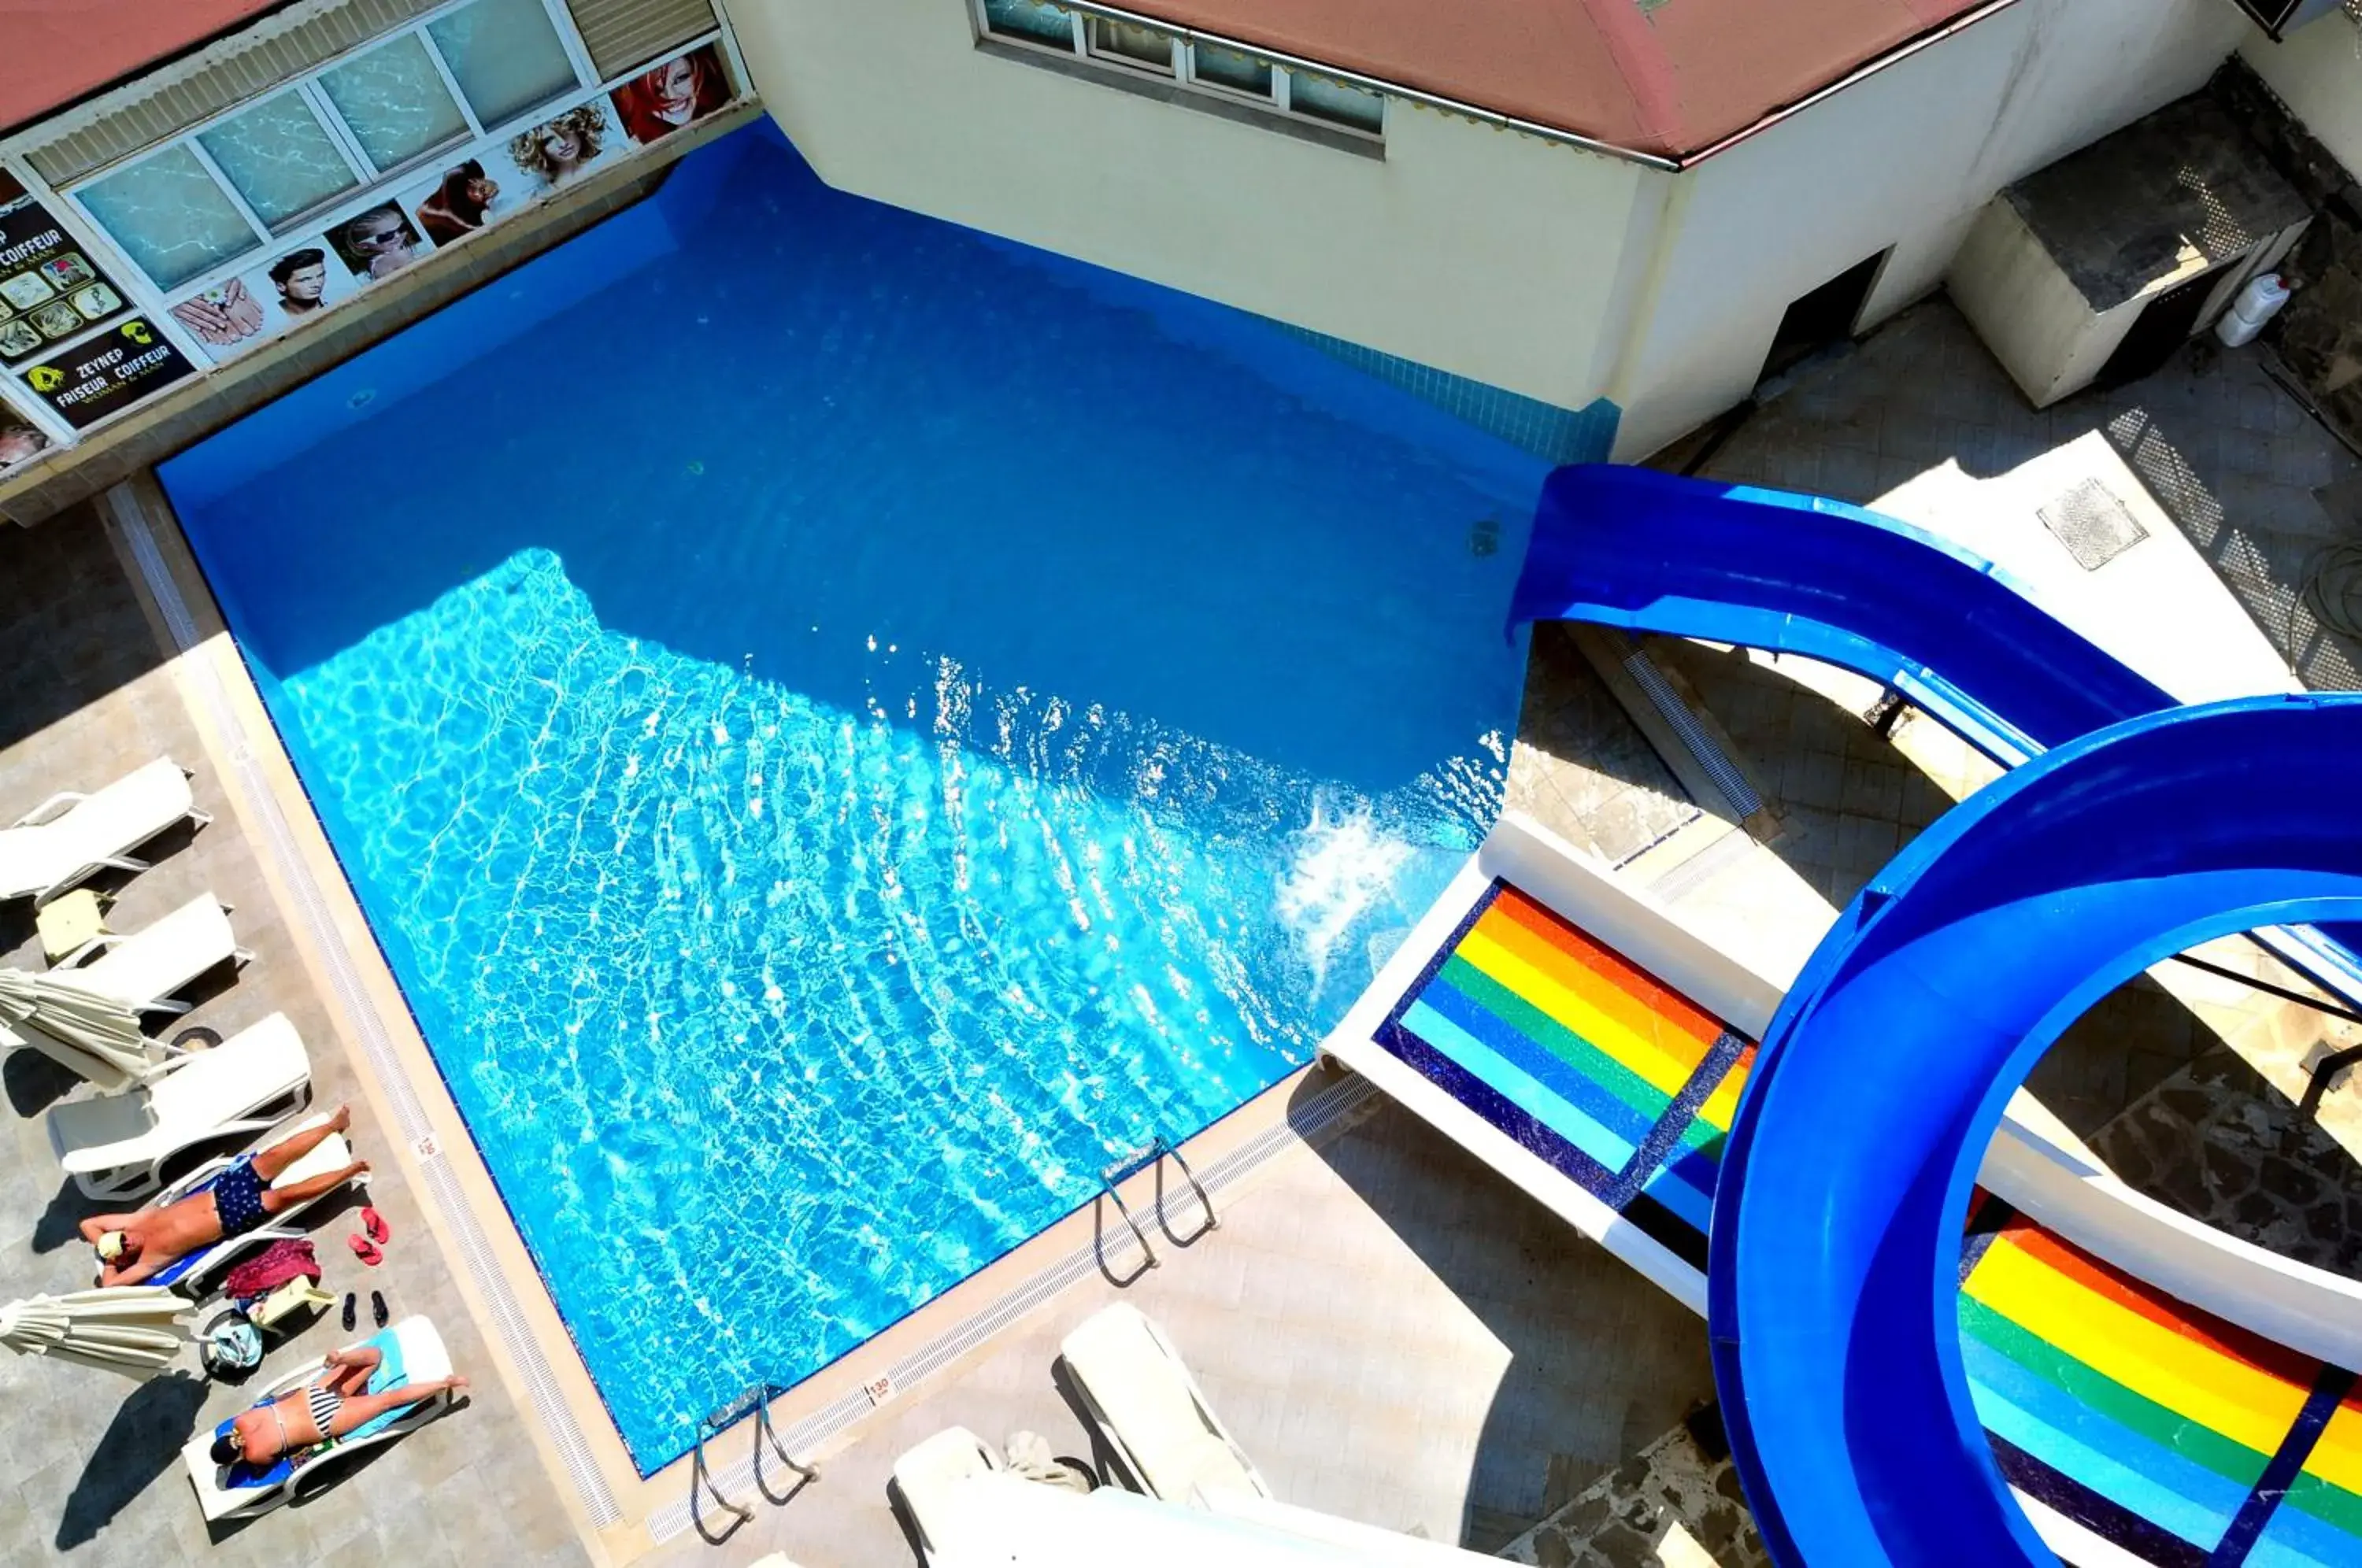 Pool View in Cinar Family Suite Hotel - Side